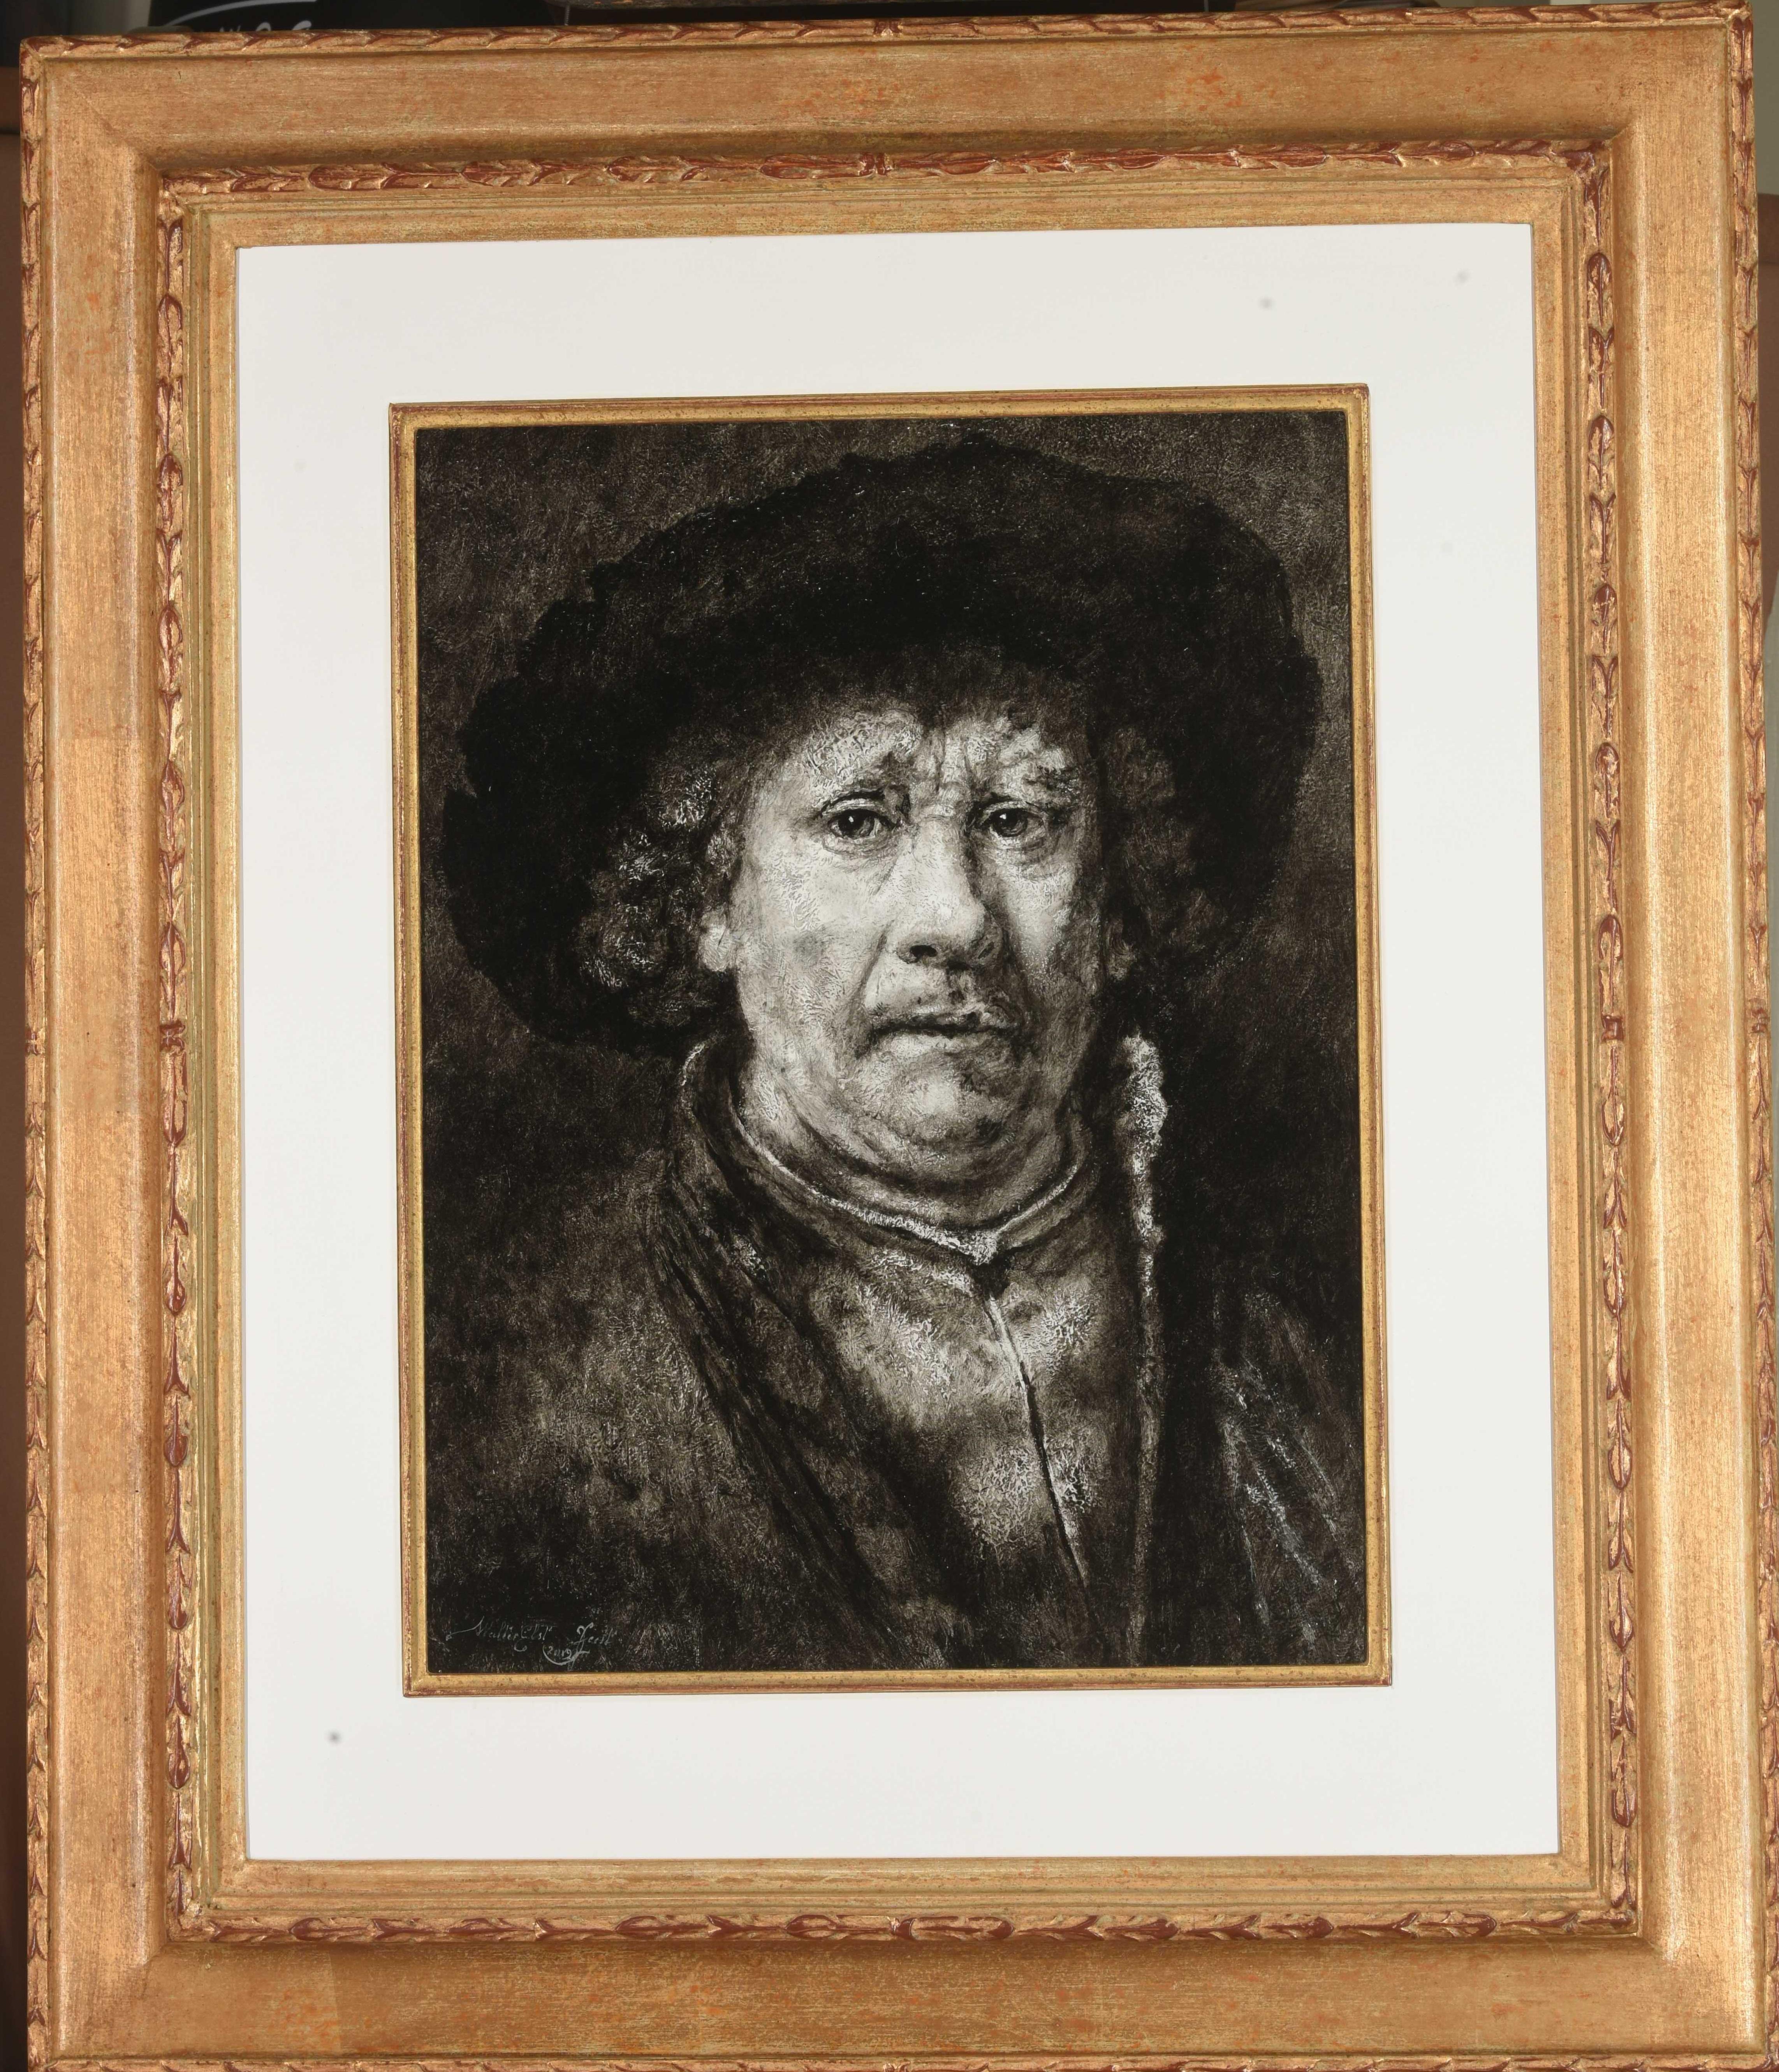 Walter Elst Portrait Painting - Grisaillestudie Study Oil Painting Rembrandt Black and White on Panel In Stock 